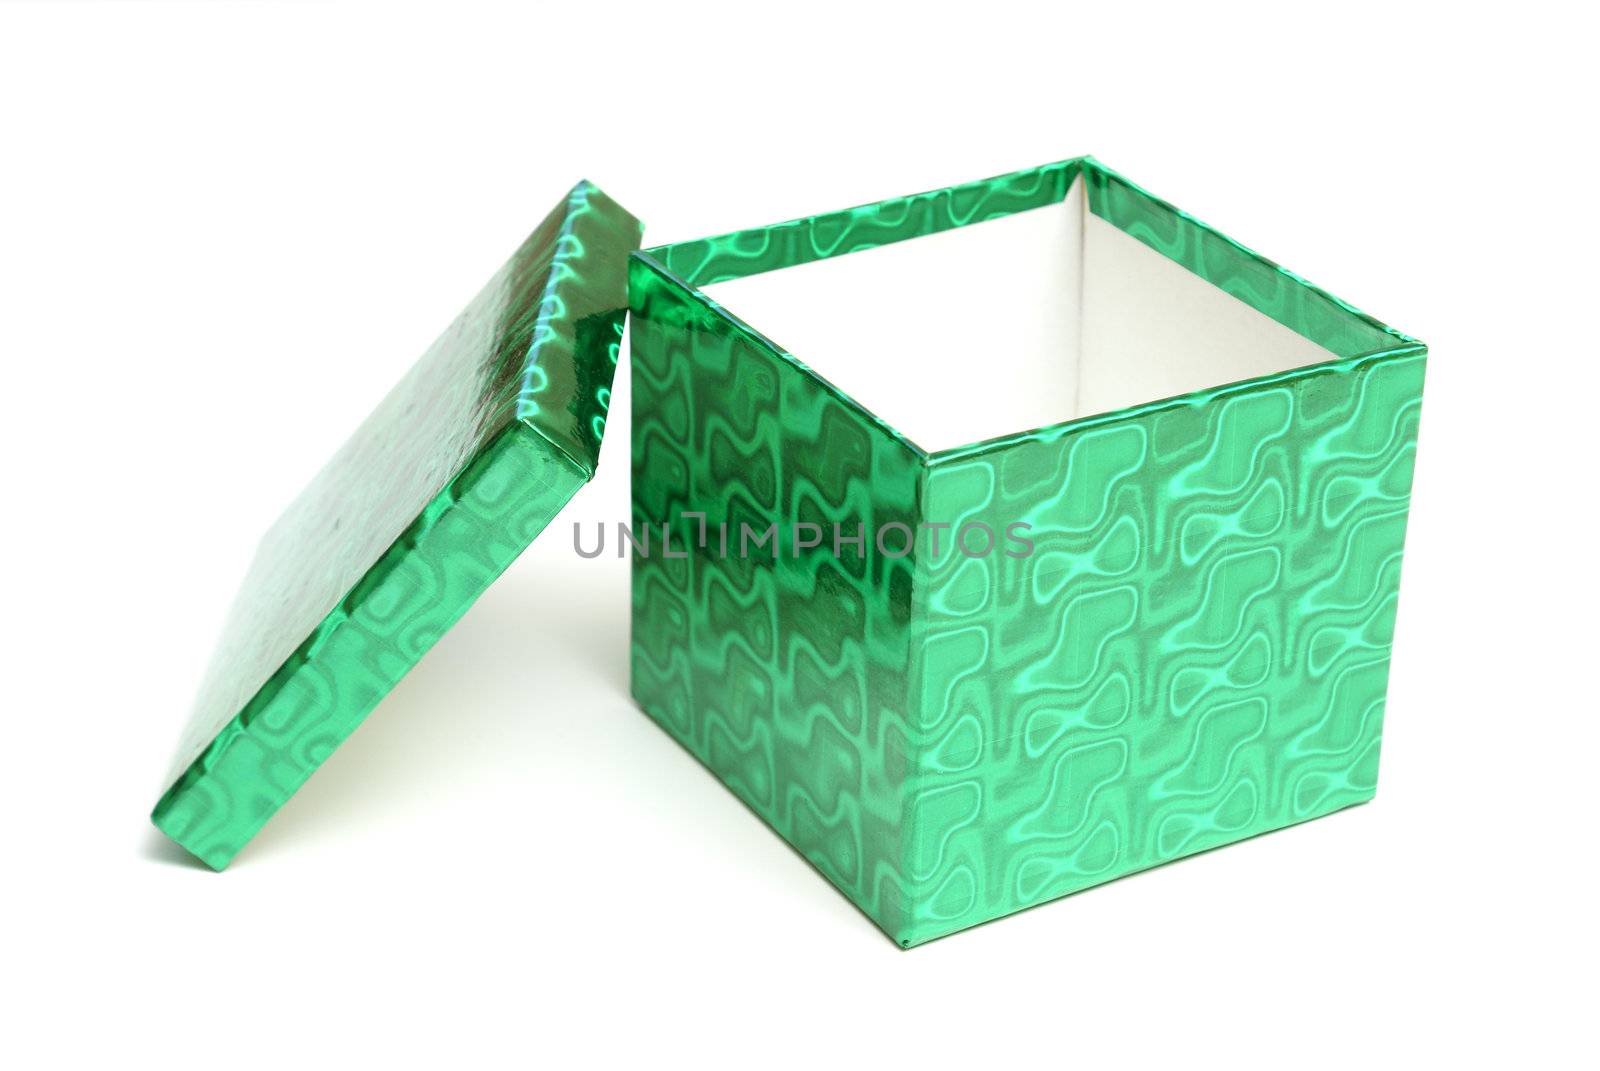 An empty green gift box over a white background.